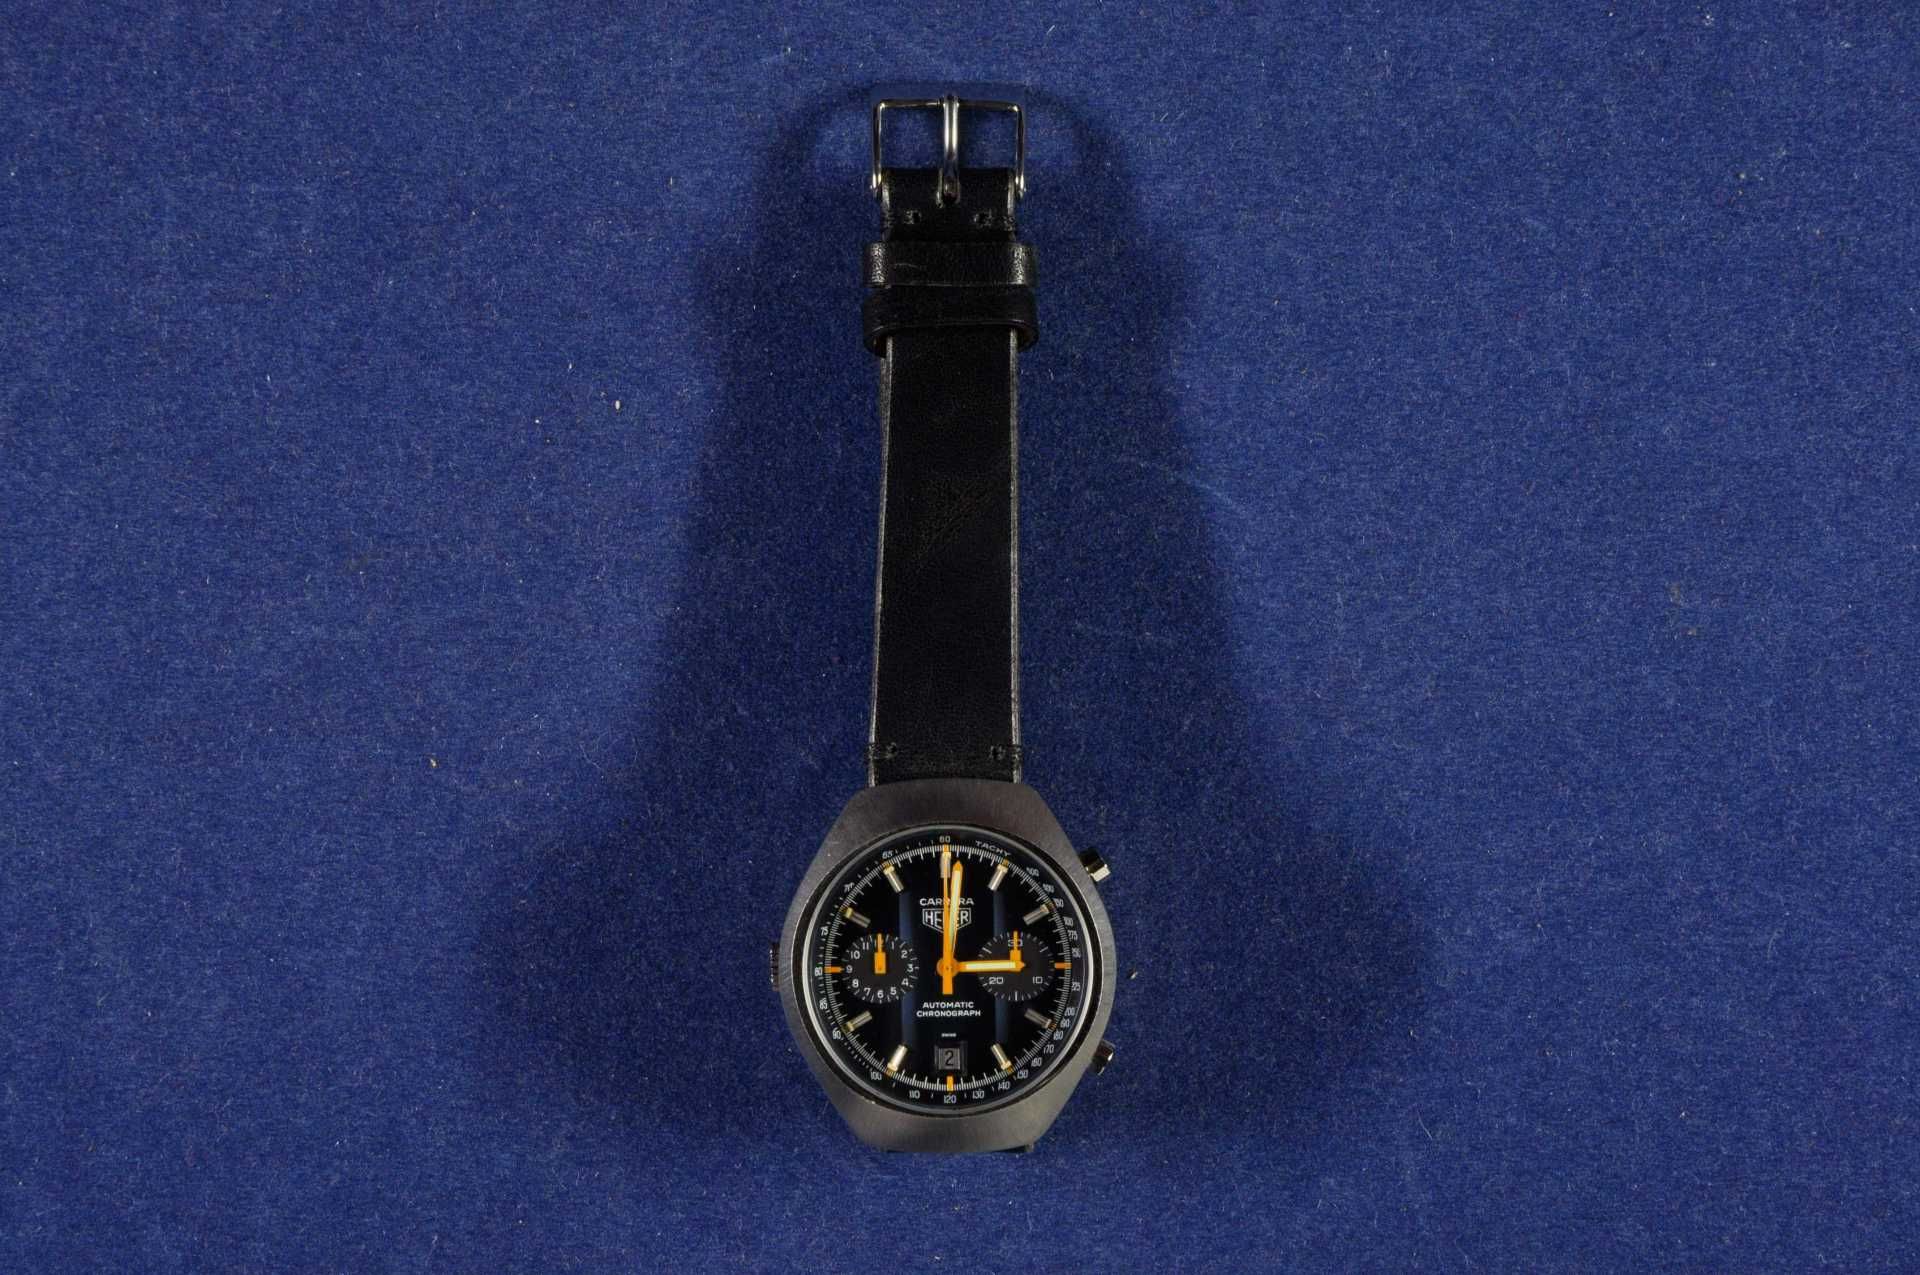 Gentlemen bracelet clock \\\Carrera this year\\\ chronograph. Ca. 38 mm, about 1975, stainless steel - Image 2 of 6